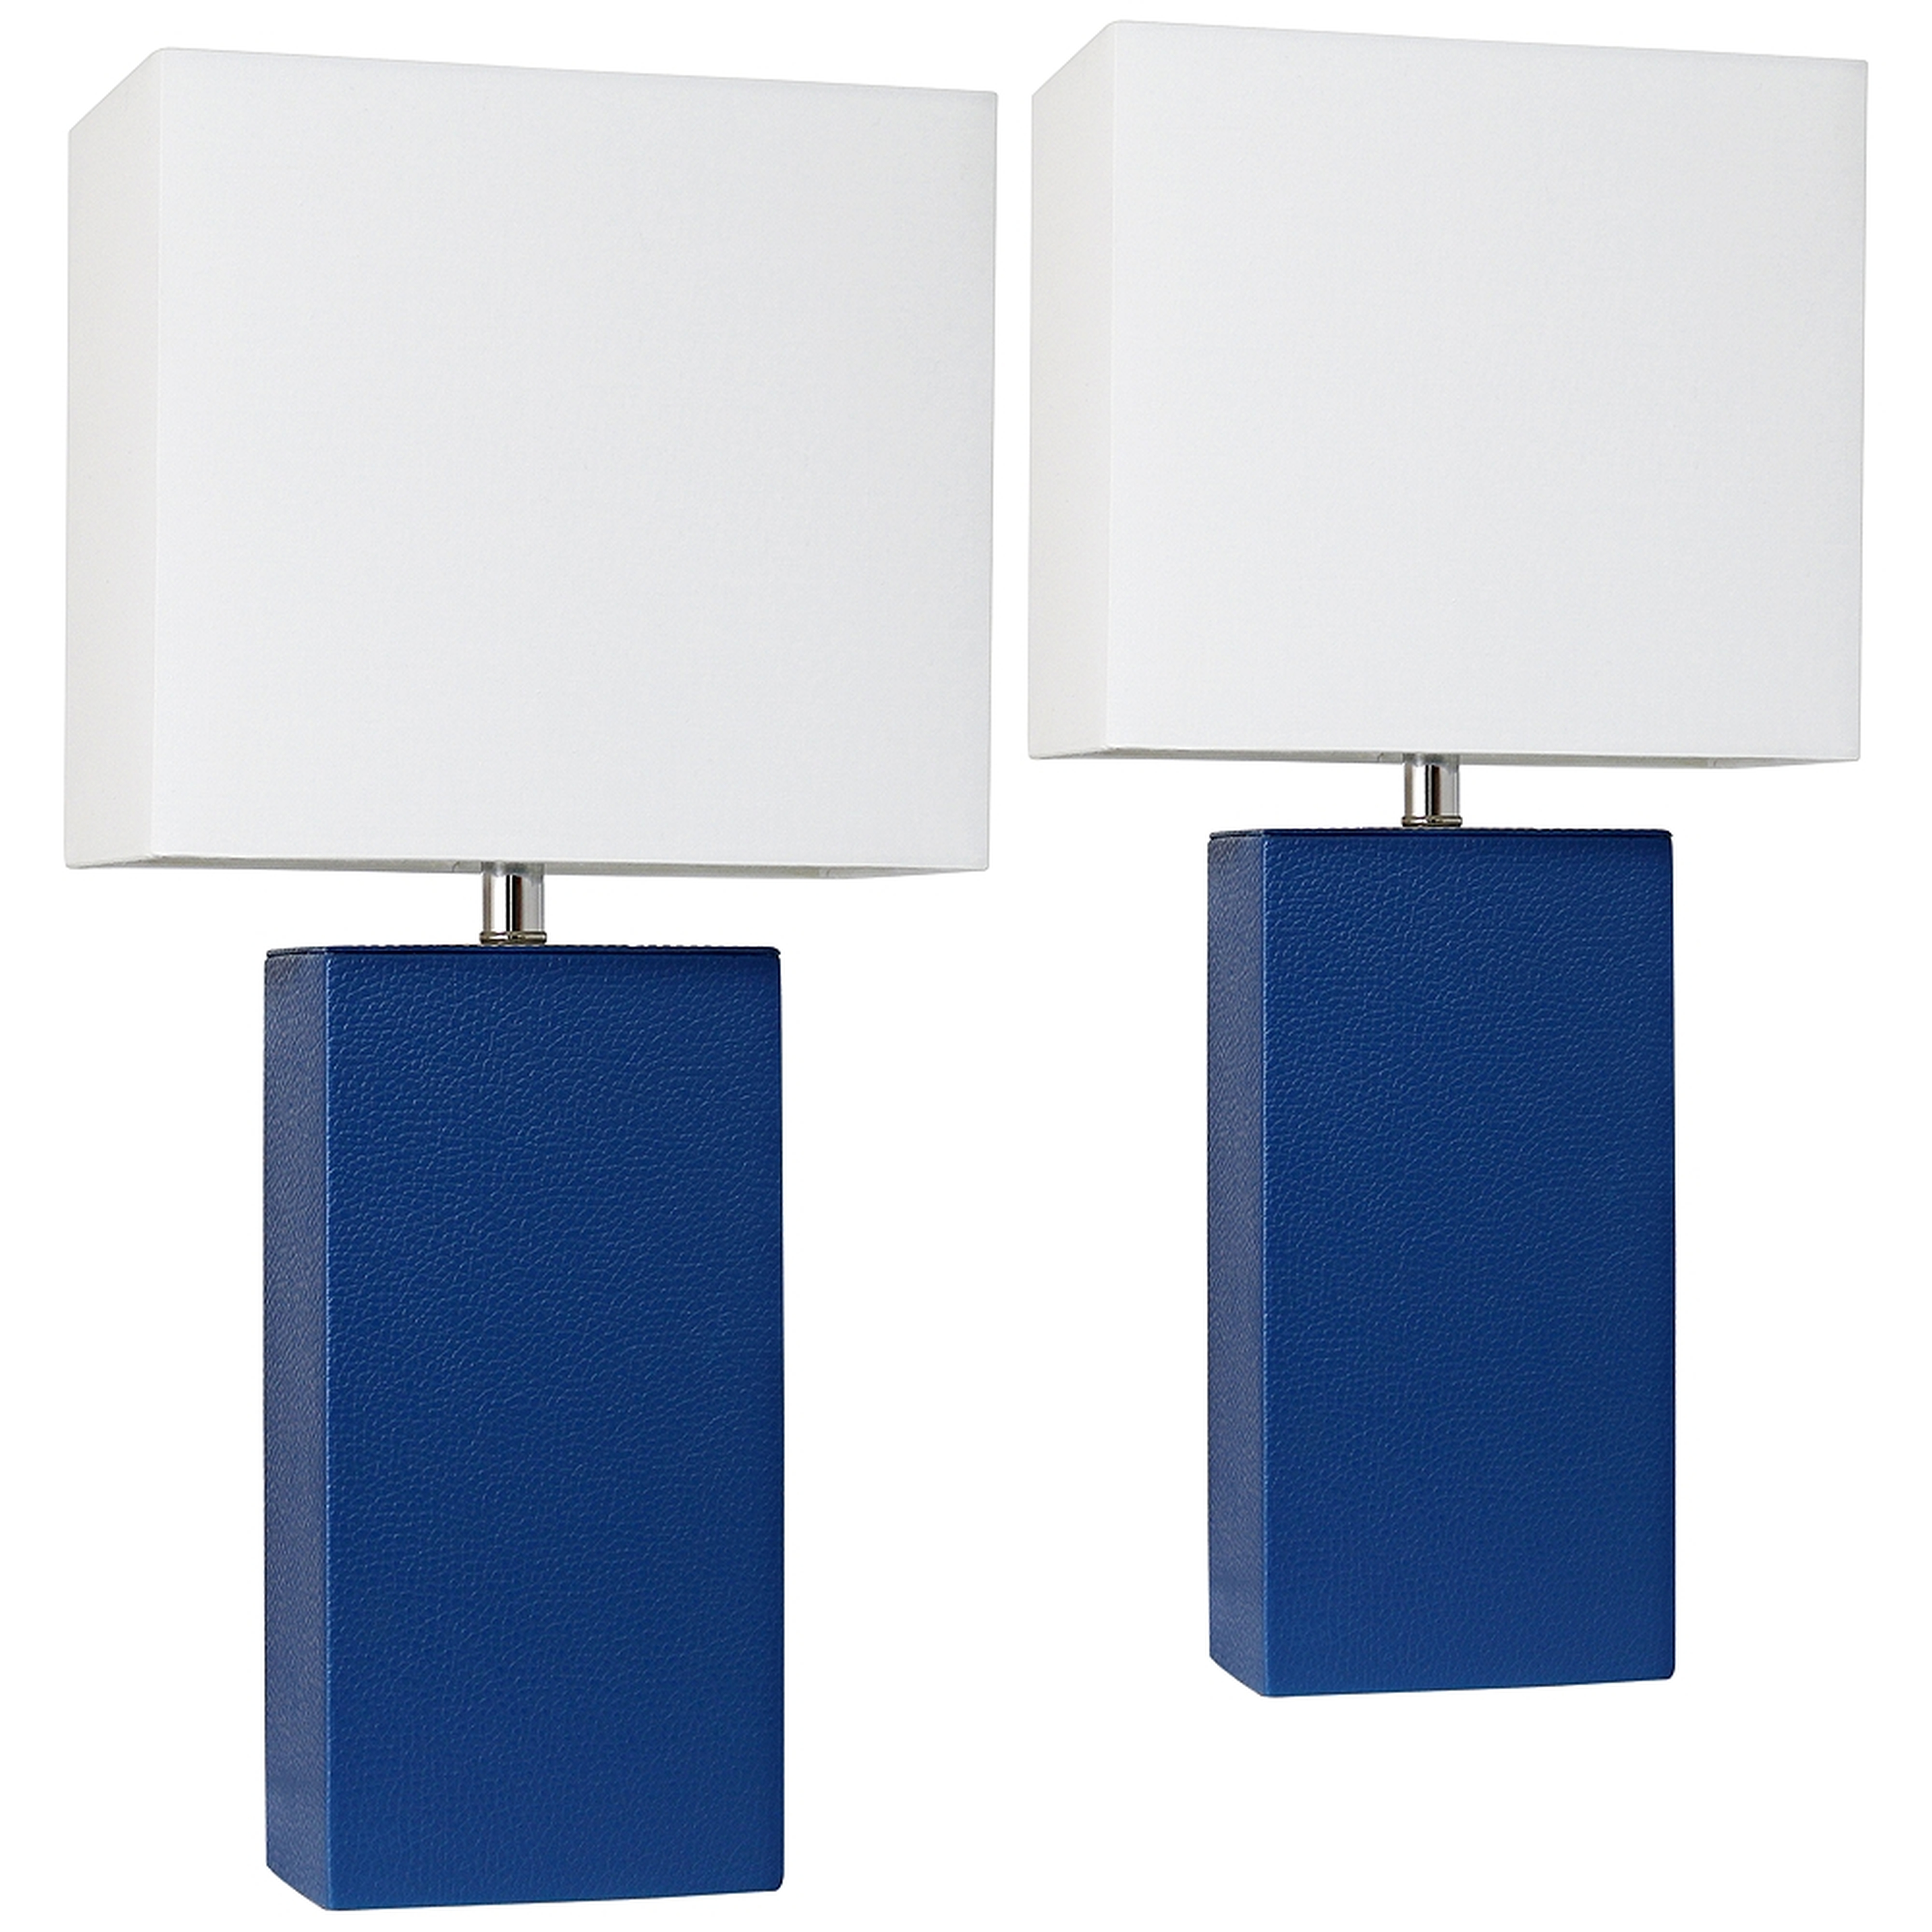 Elegant Designs Blue Leather Table Lamps Set of 2 - Style # 58G62 - Lamps Plus